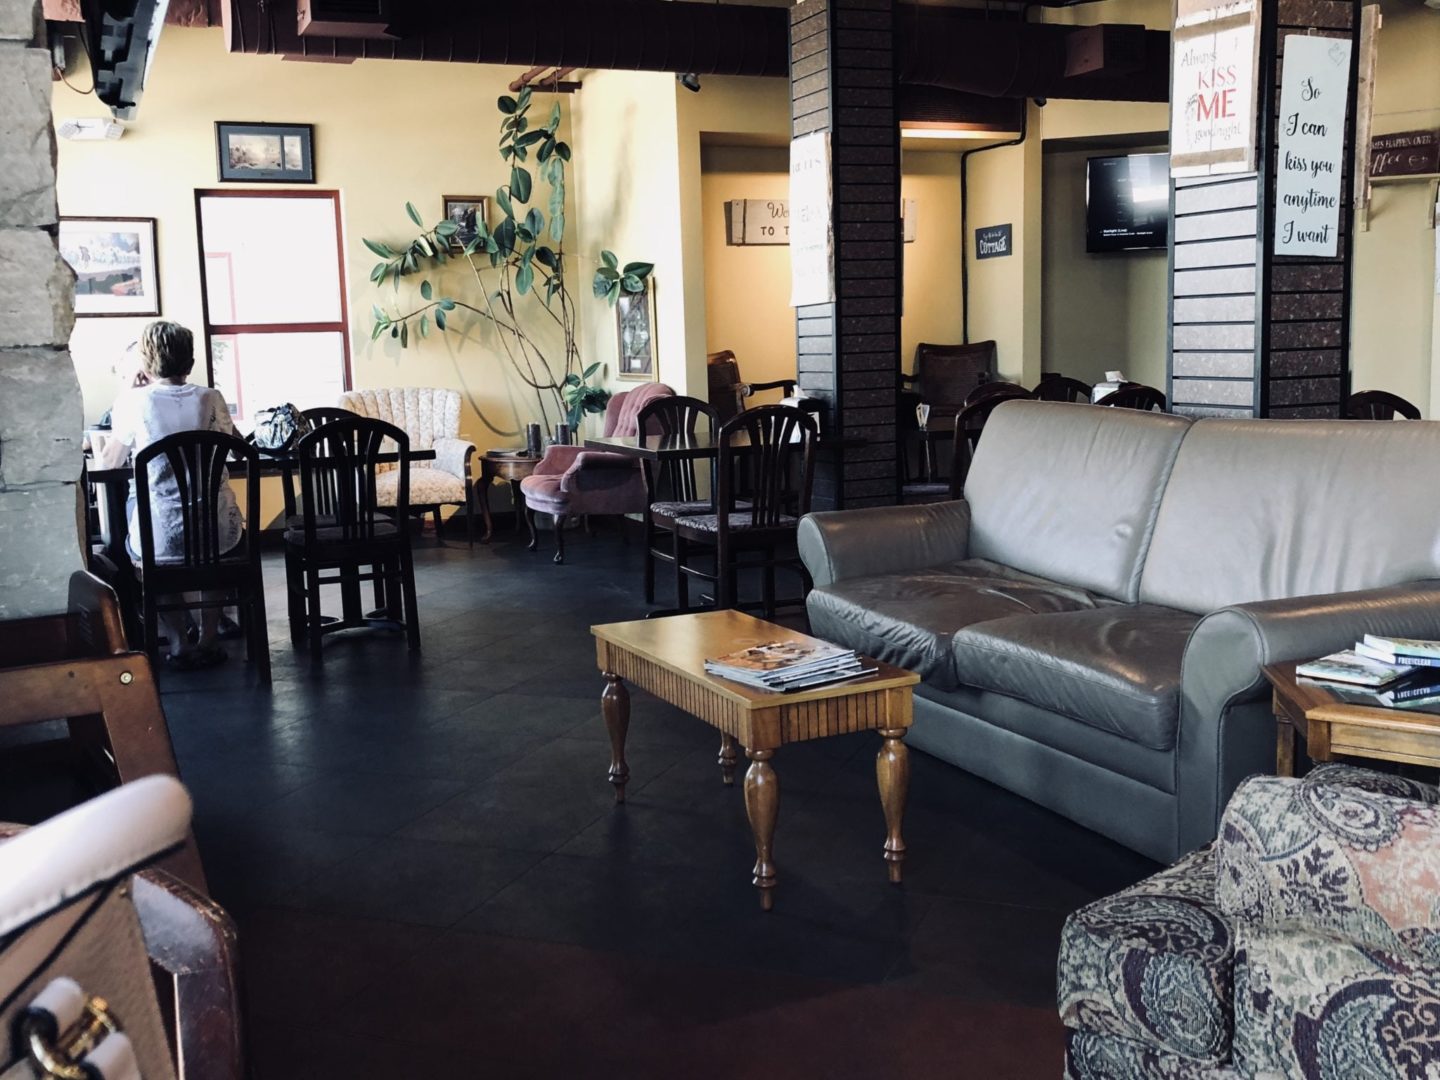 Inside Paradigm Coffee and Music's building